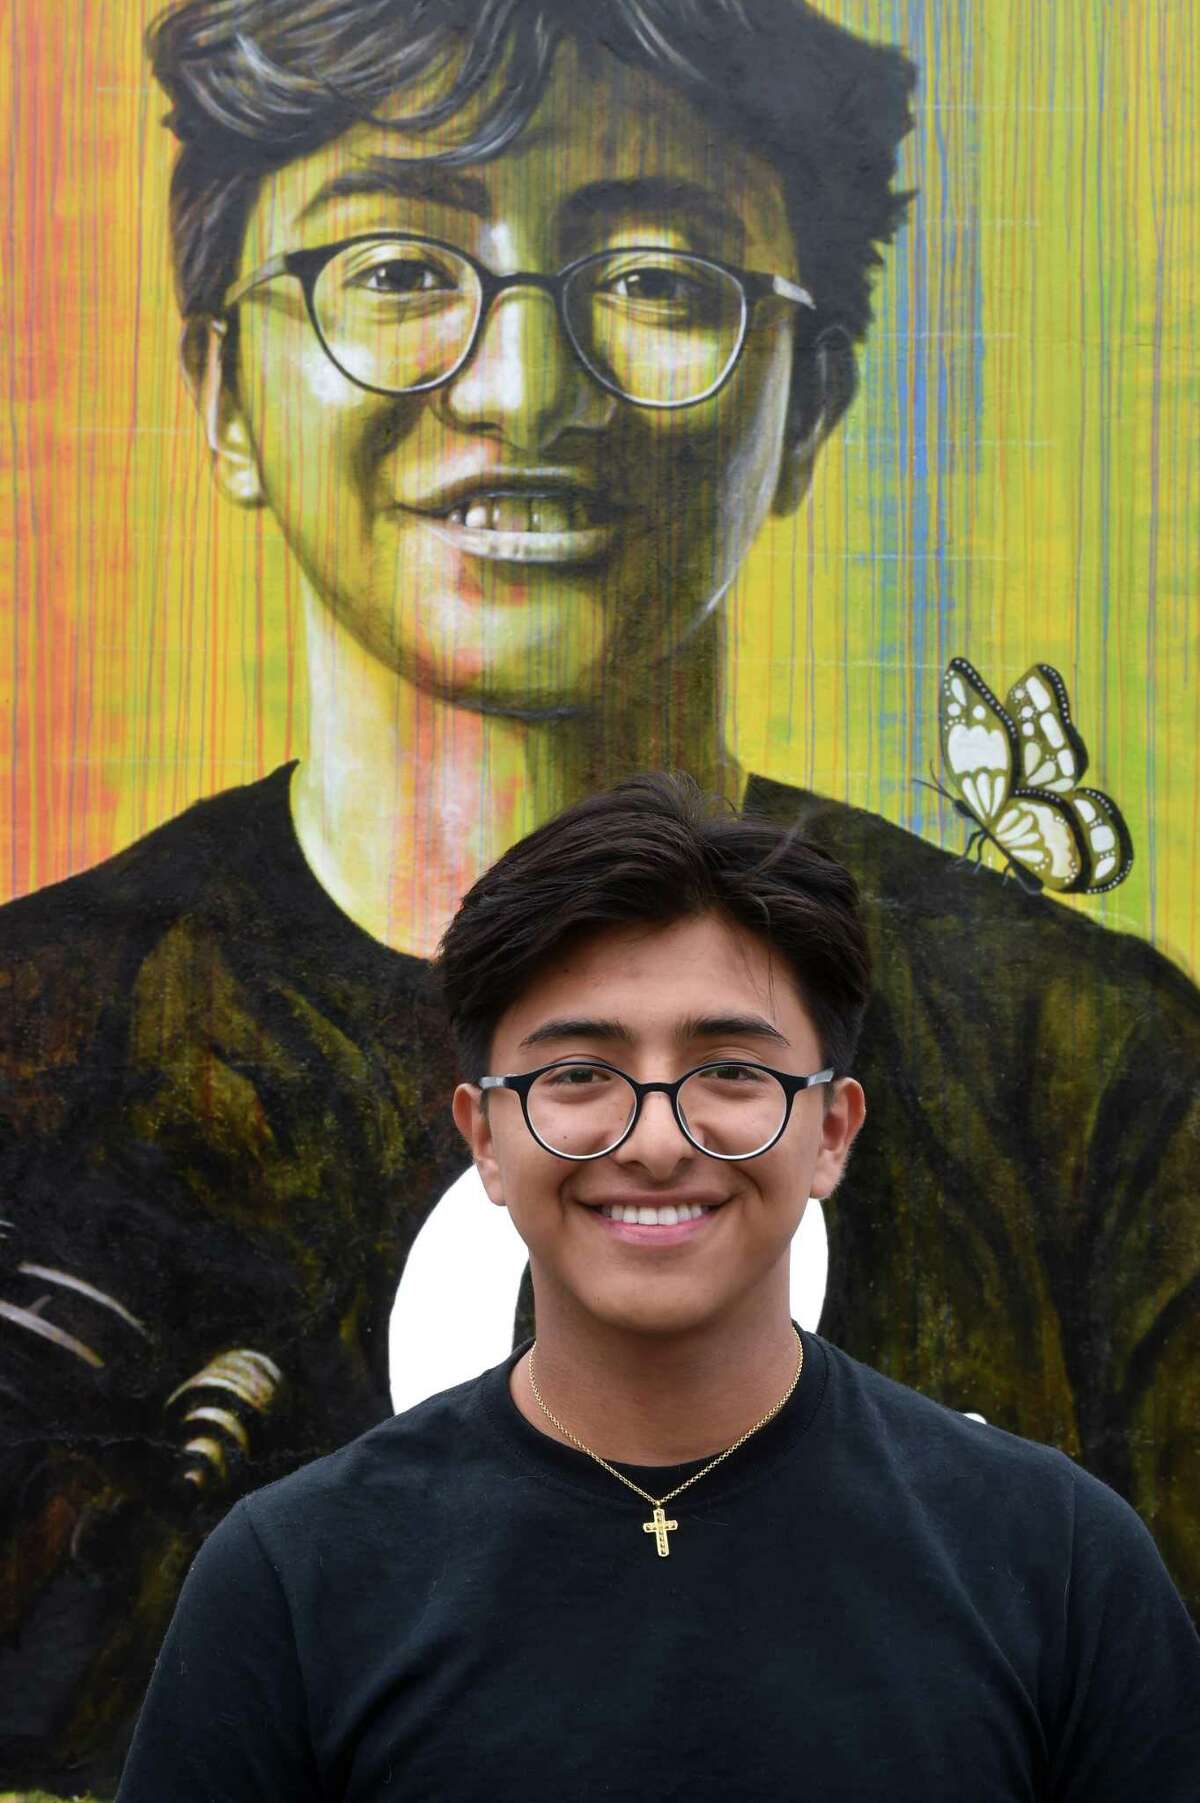 Camilo Bracho, 18, of Old Saybrook is one of six Old Saybrook Public School students incorporated into the mural, Just a Piece of Freedom, on the side of River Mart on Main Street in Old Saybrook on June 21, 2022.